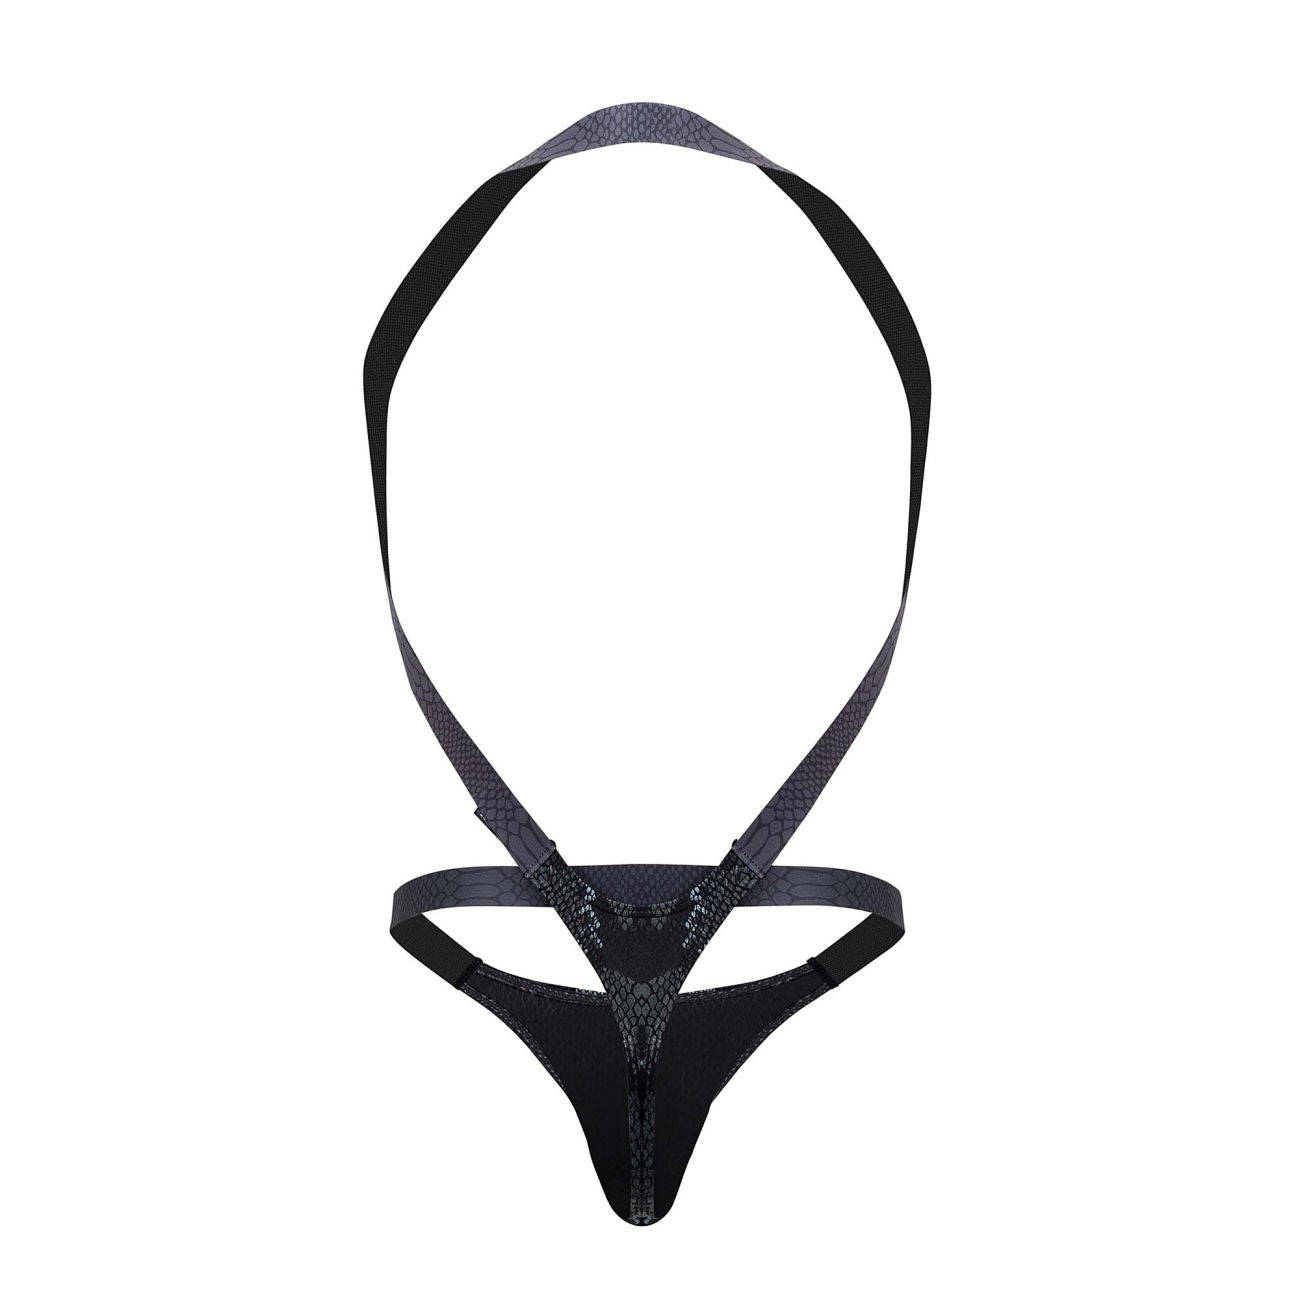 Male Power 409-282 S-naked Criss Cross Thong Silver-black